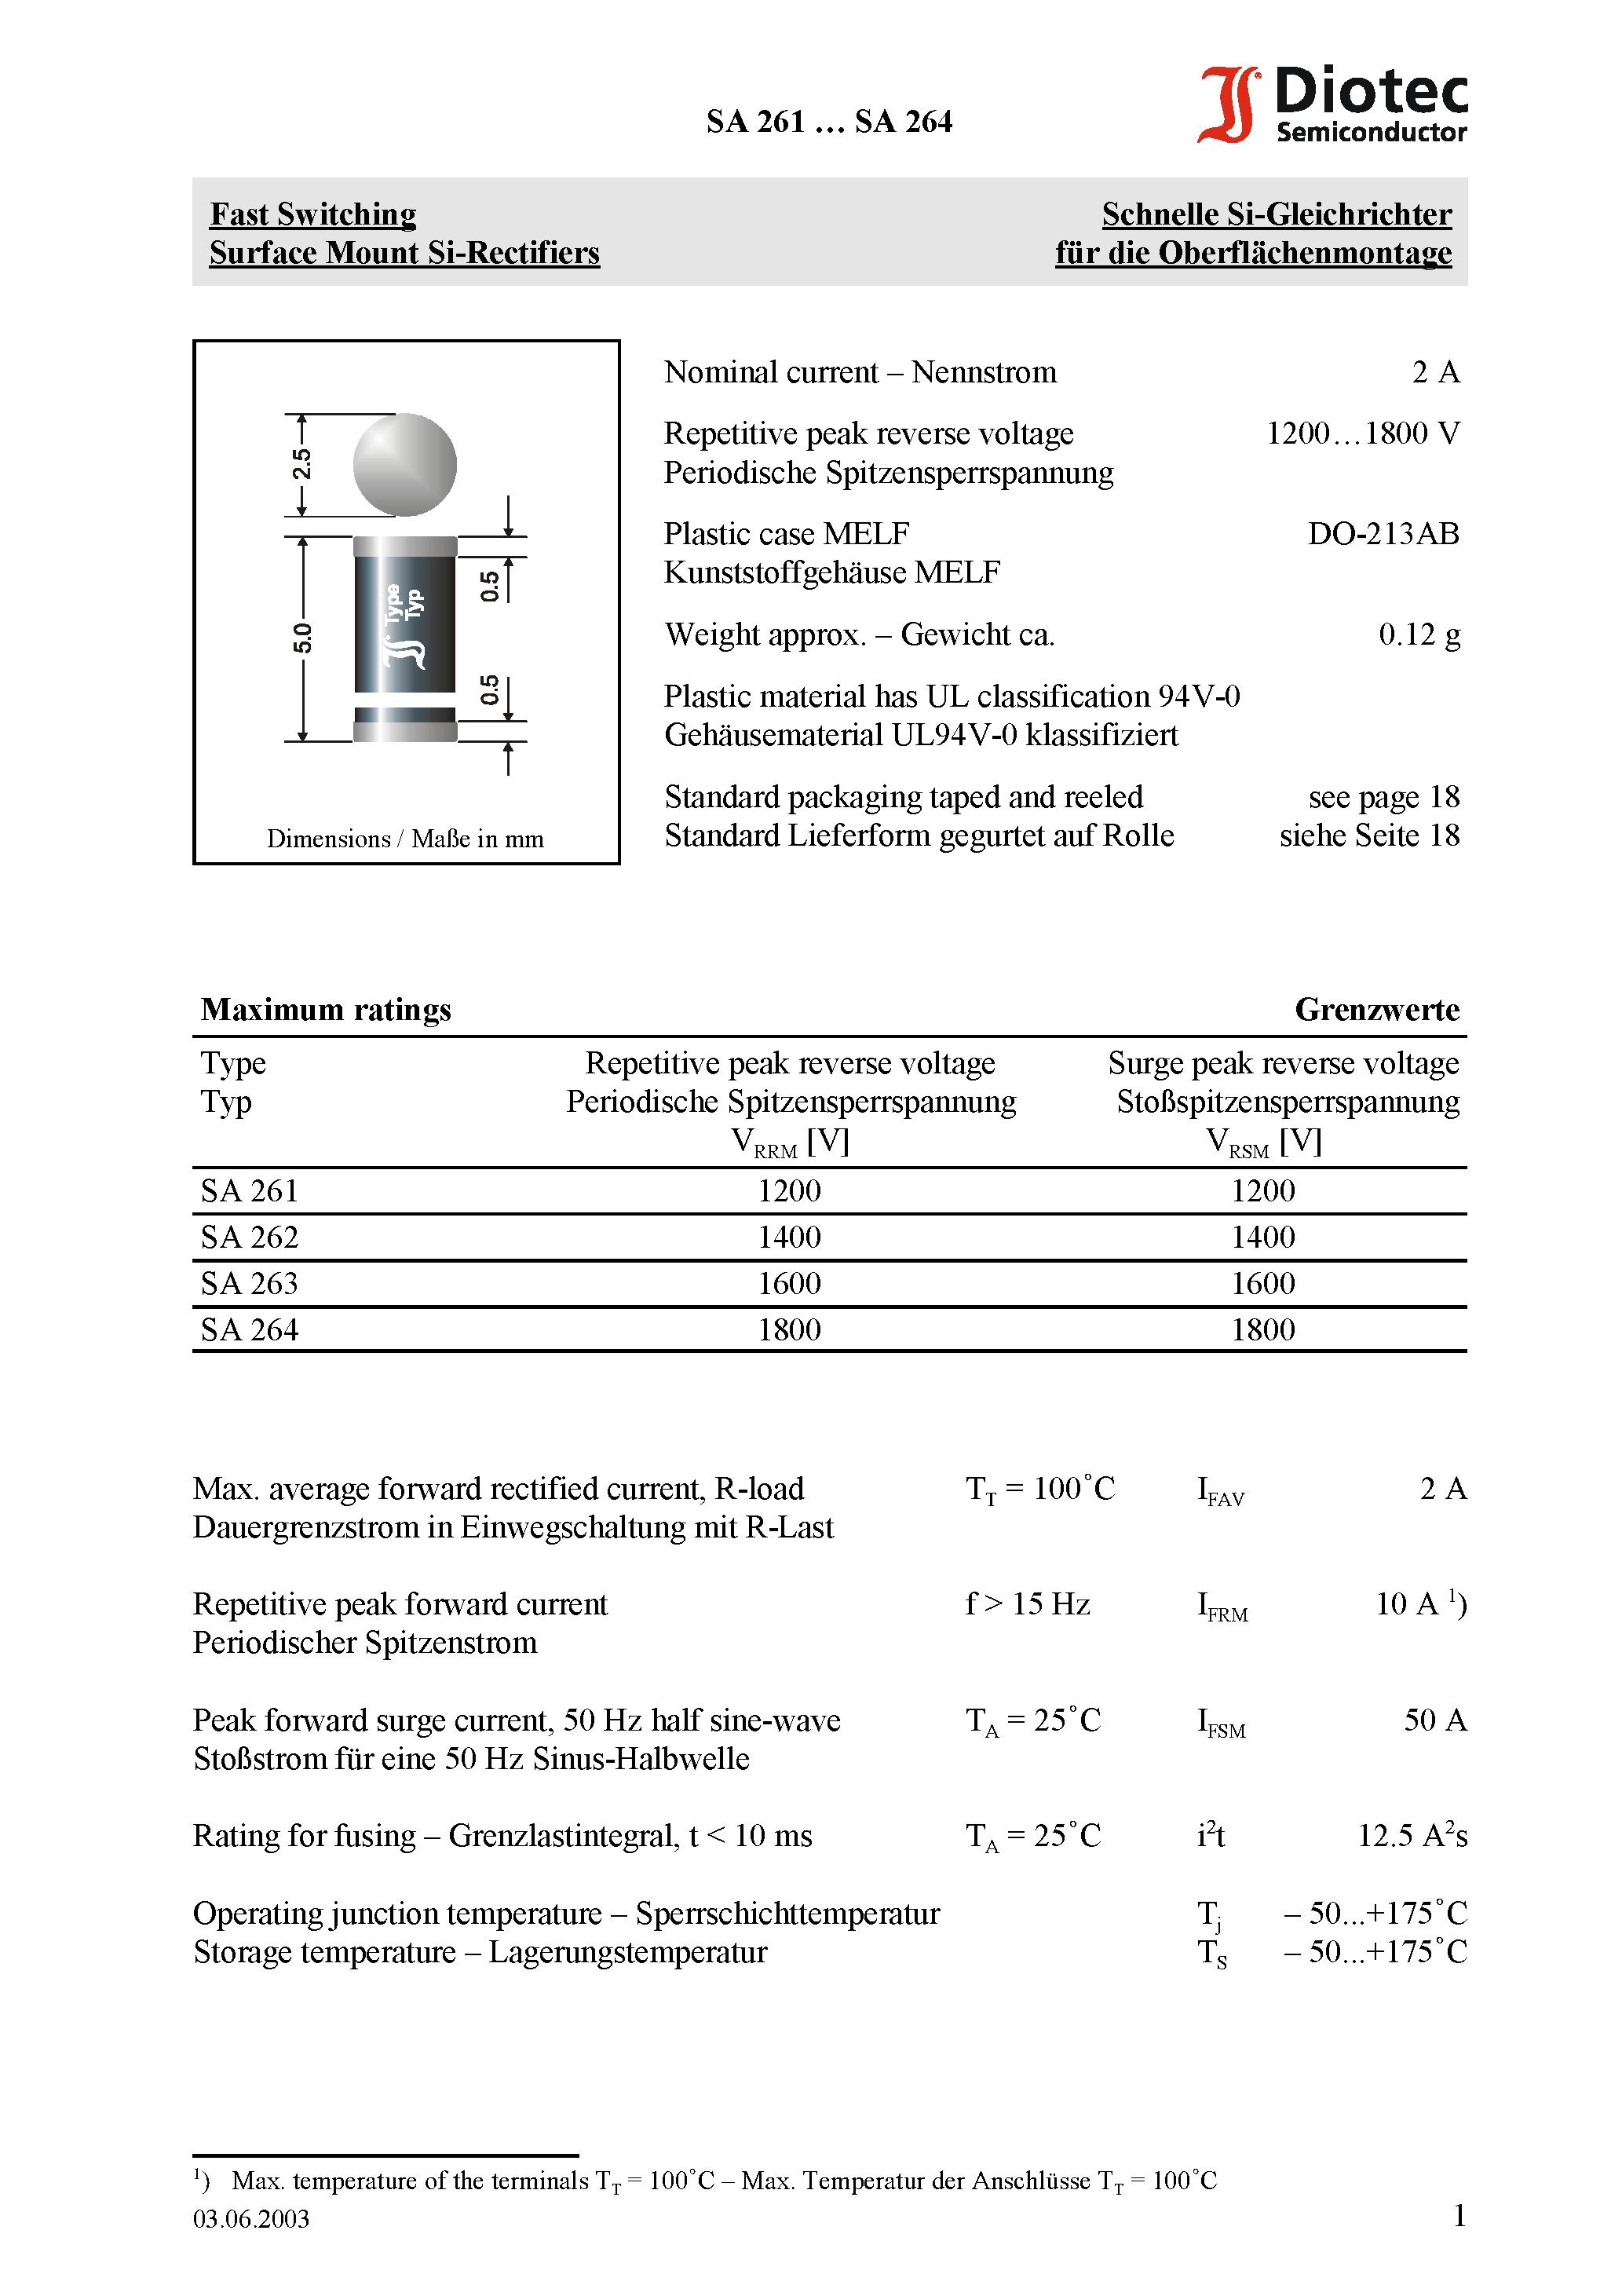 Datasheet SA262 - Fast Switching Surface Mount Si-Rectifiers page 1